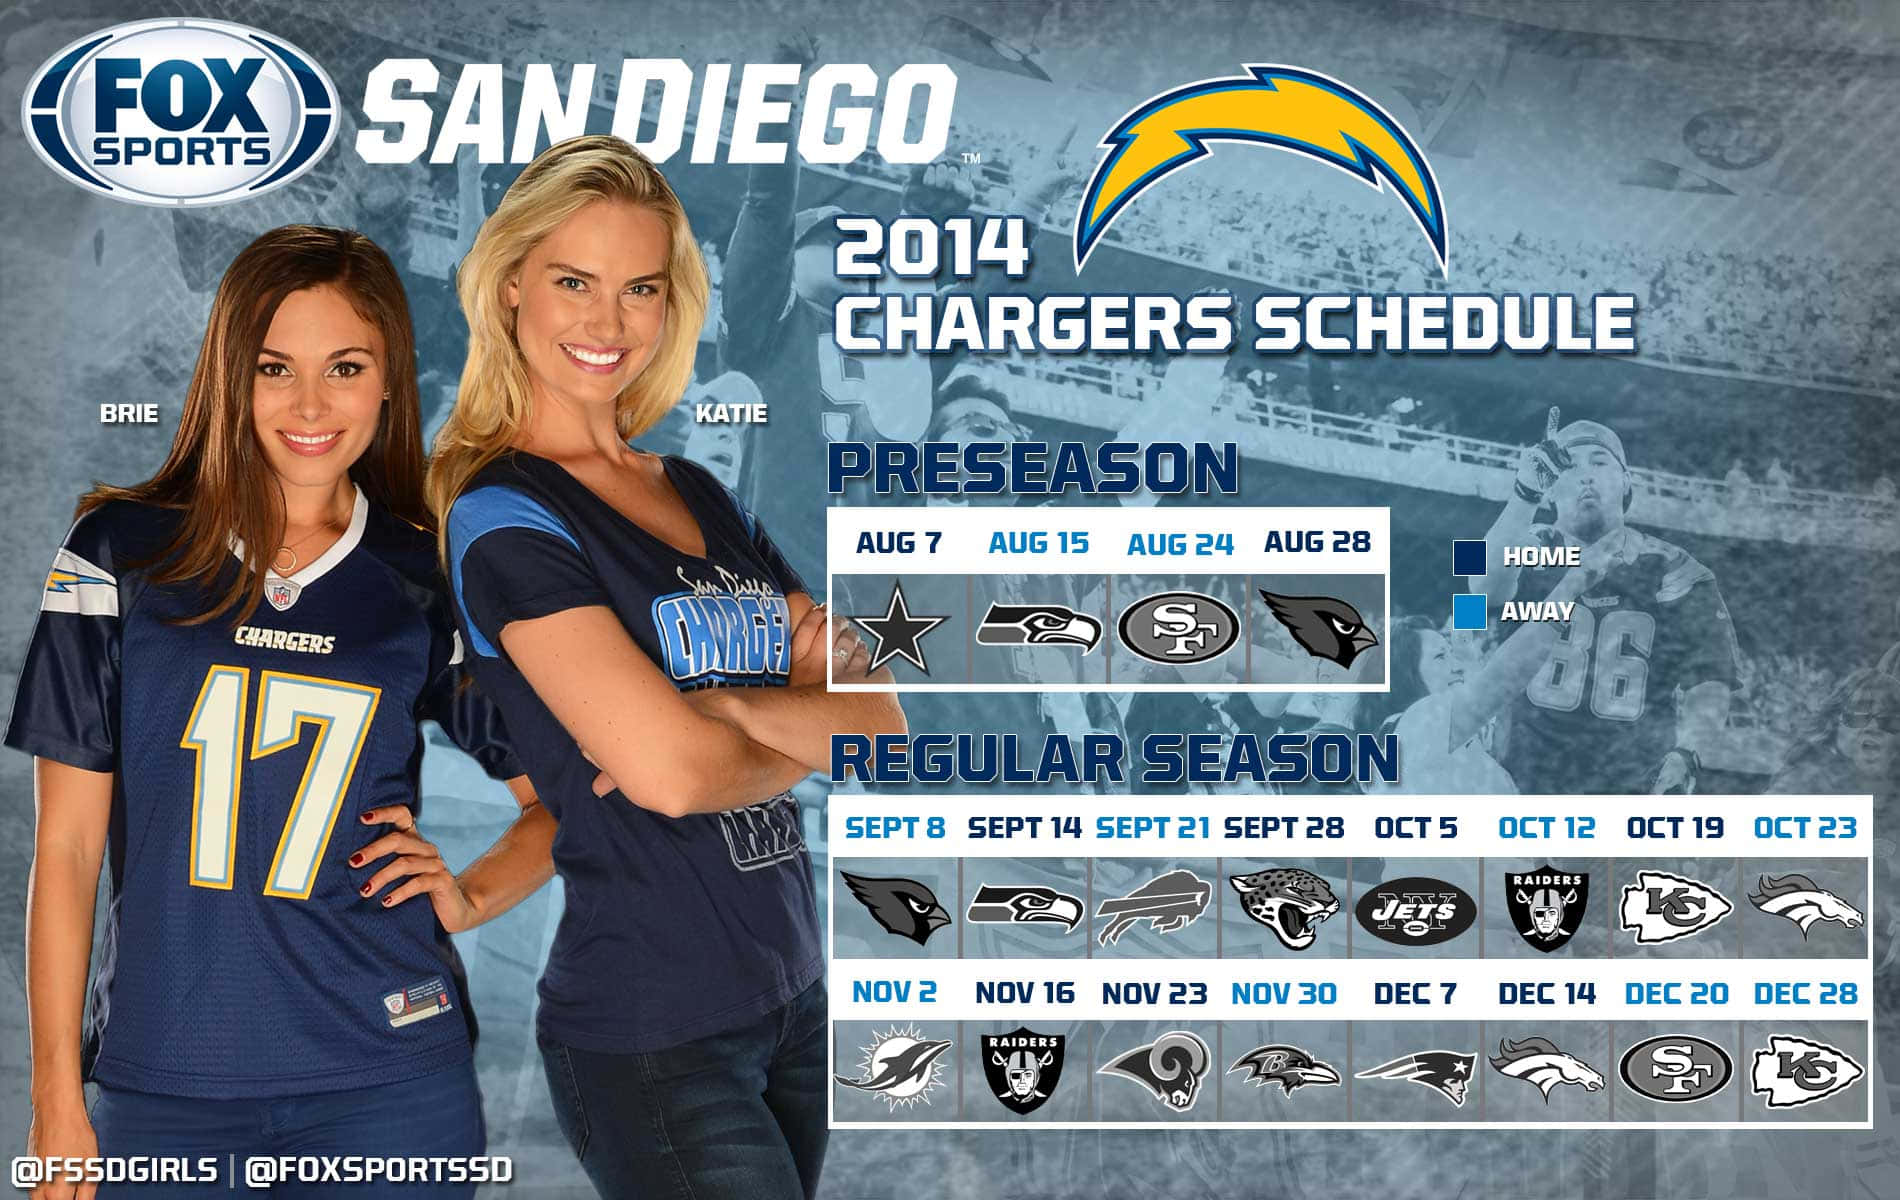 Sandiego Chargers Nfl-football-team Wallpaper